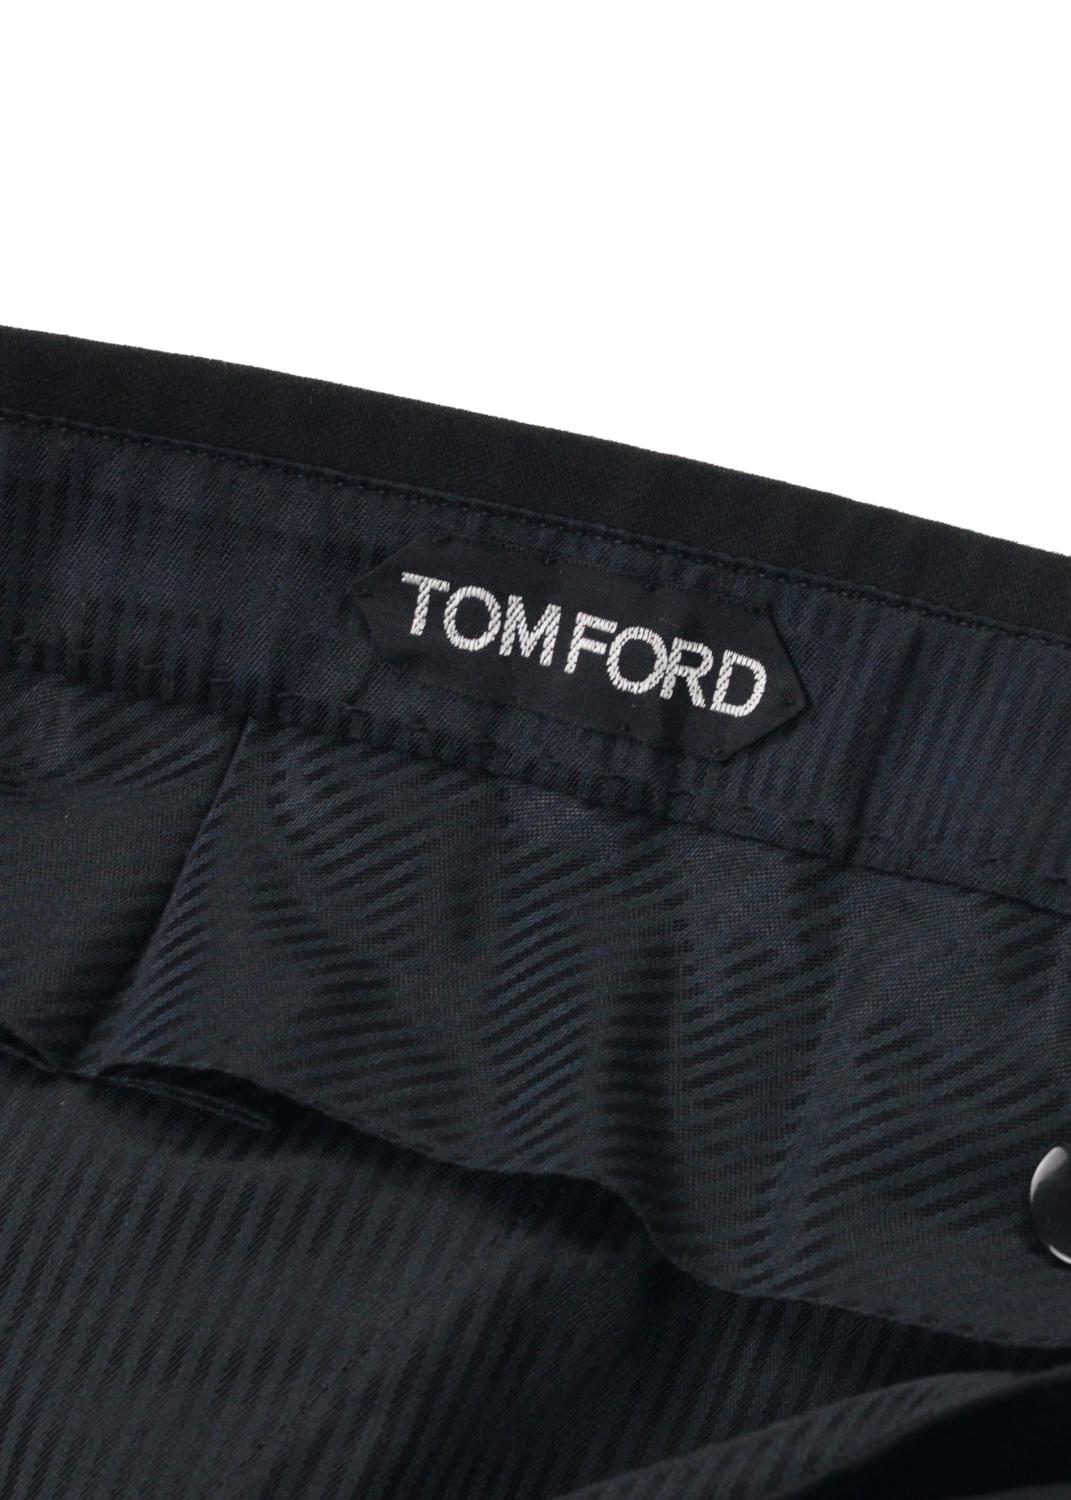 Tom Ford Men's Black Cotton Pleated Front Trousers In New Condition For Sale In Brooklyn, NY